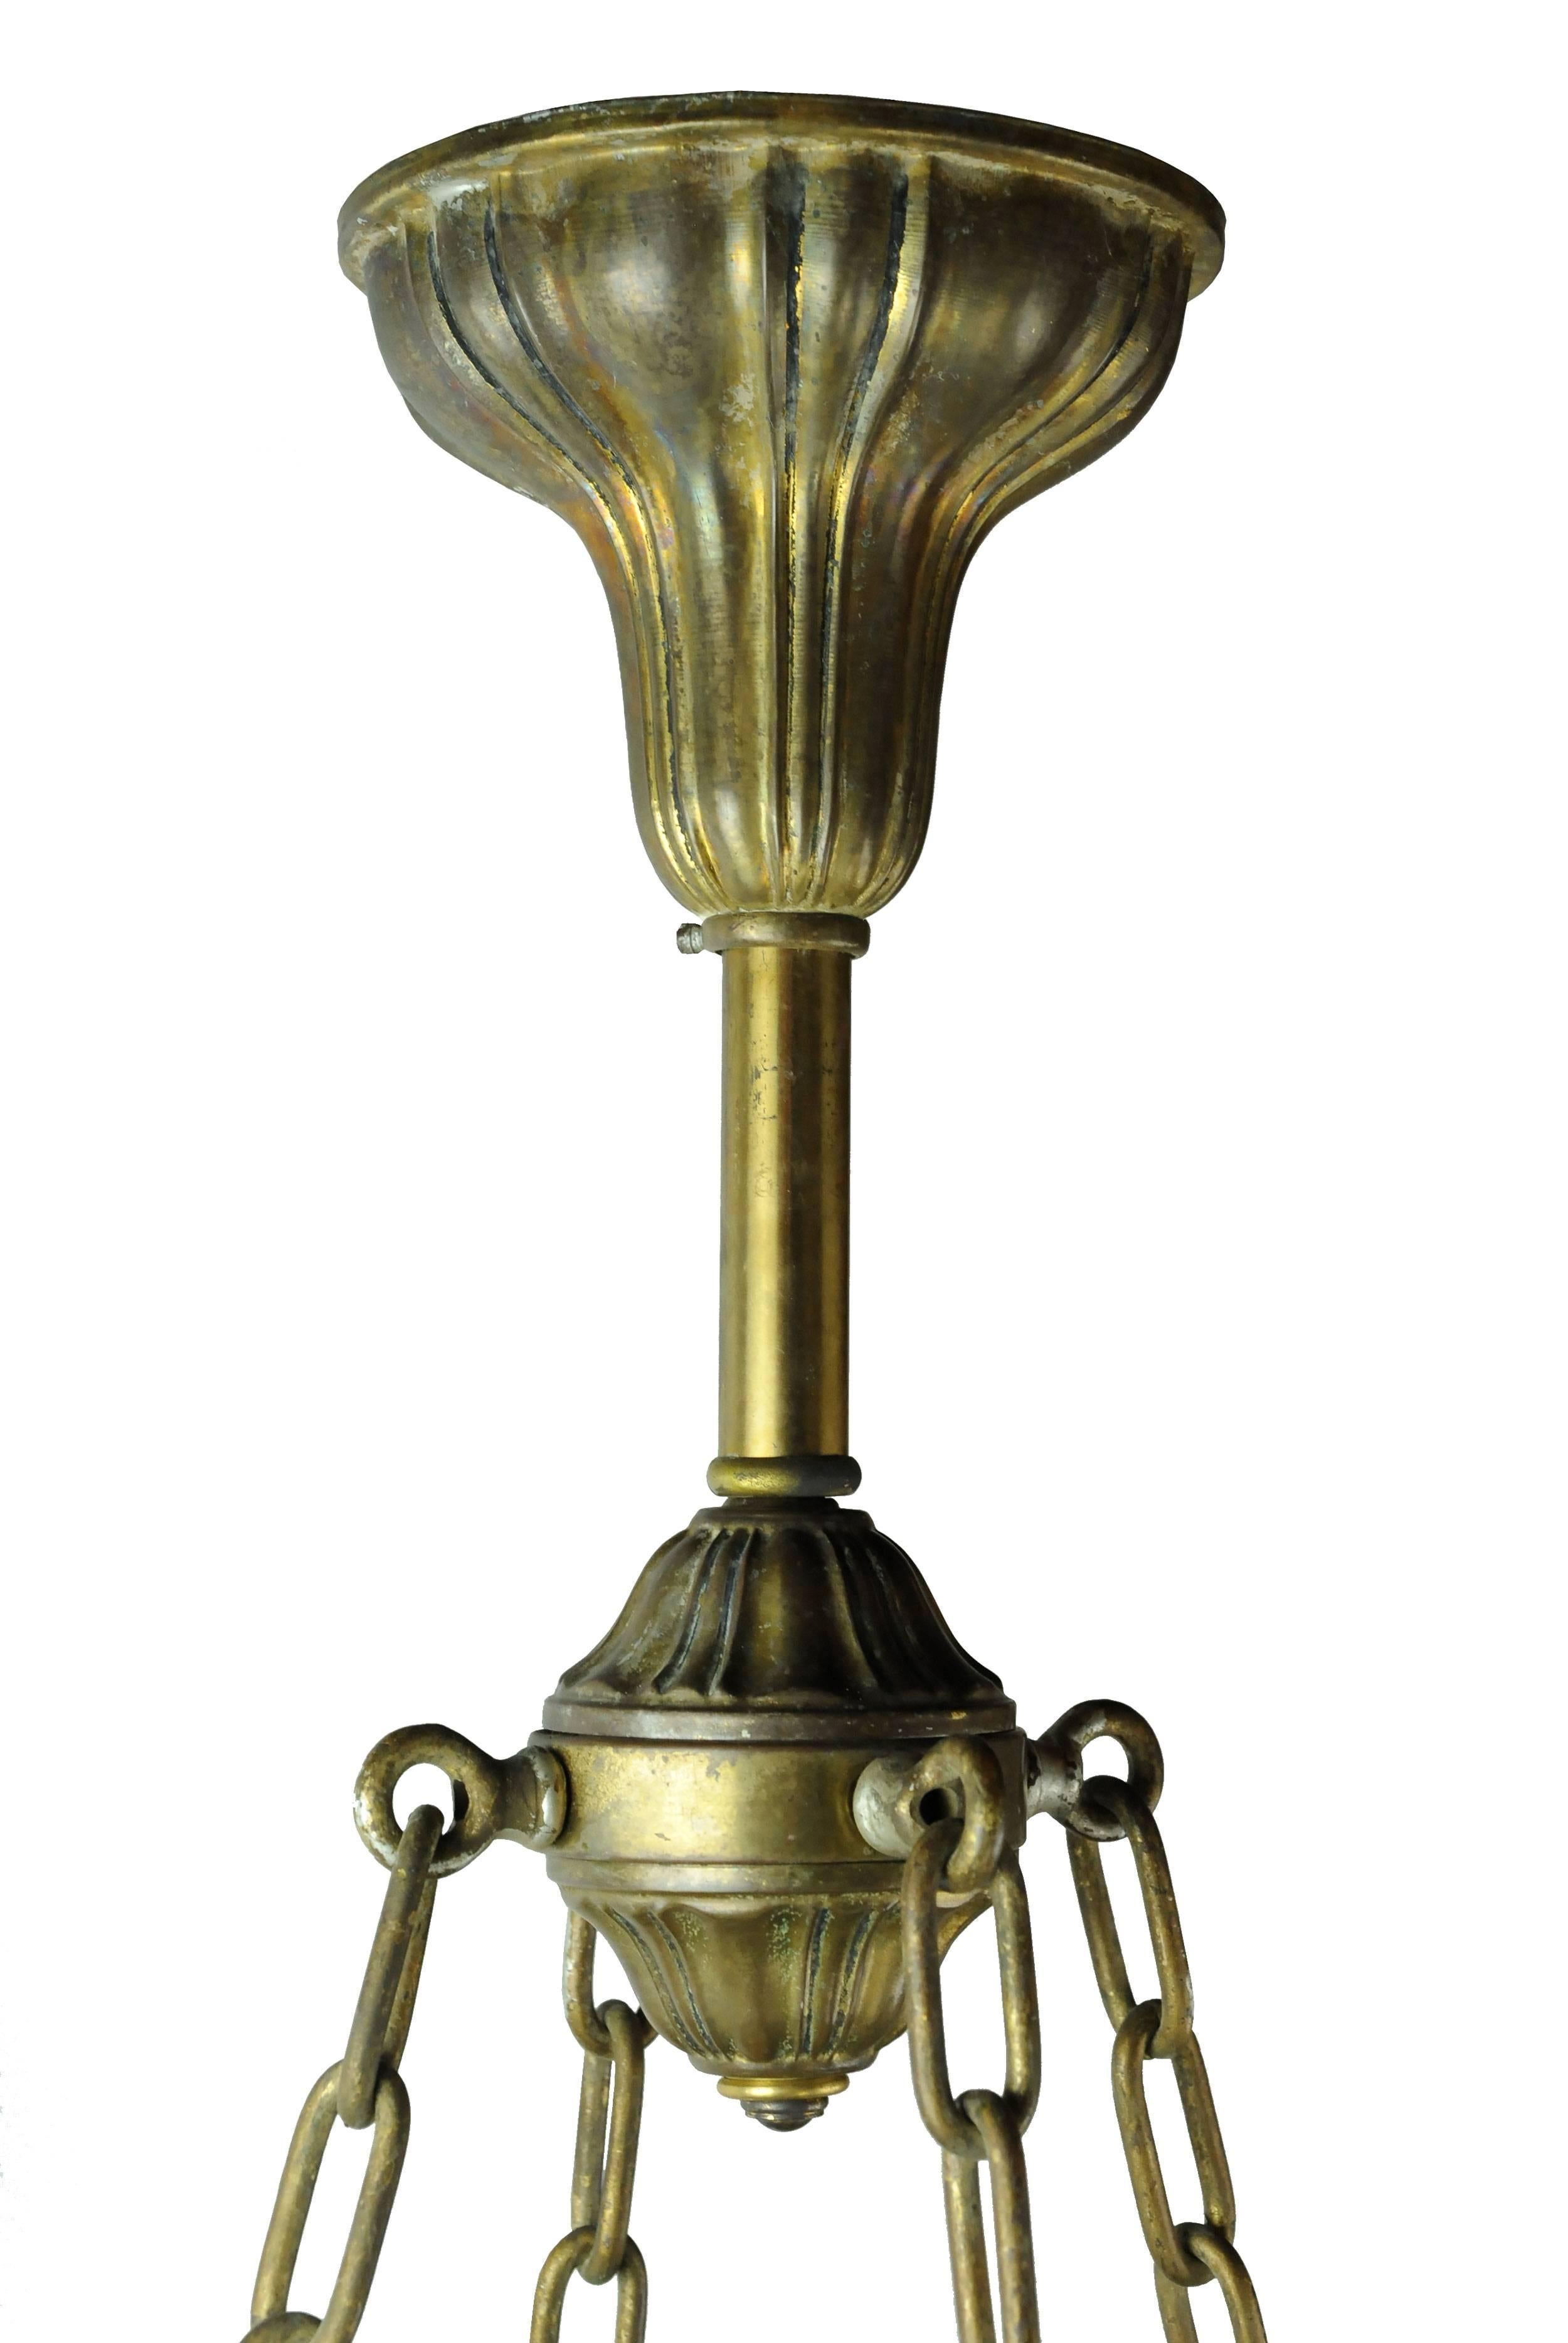 Colonial Revival Sheffield Pan Fixture in Brass with Glass Shades